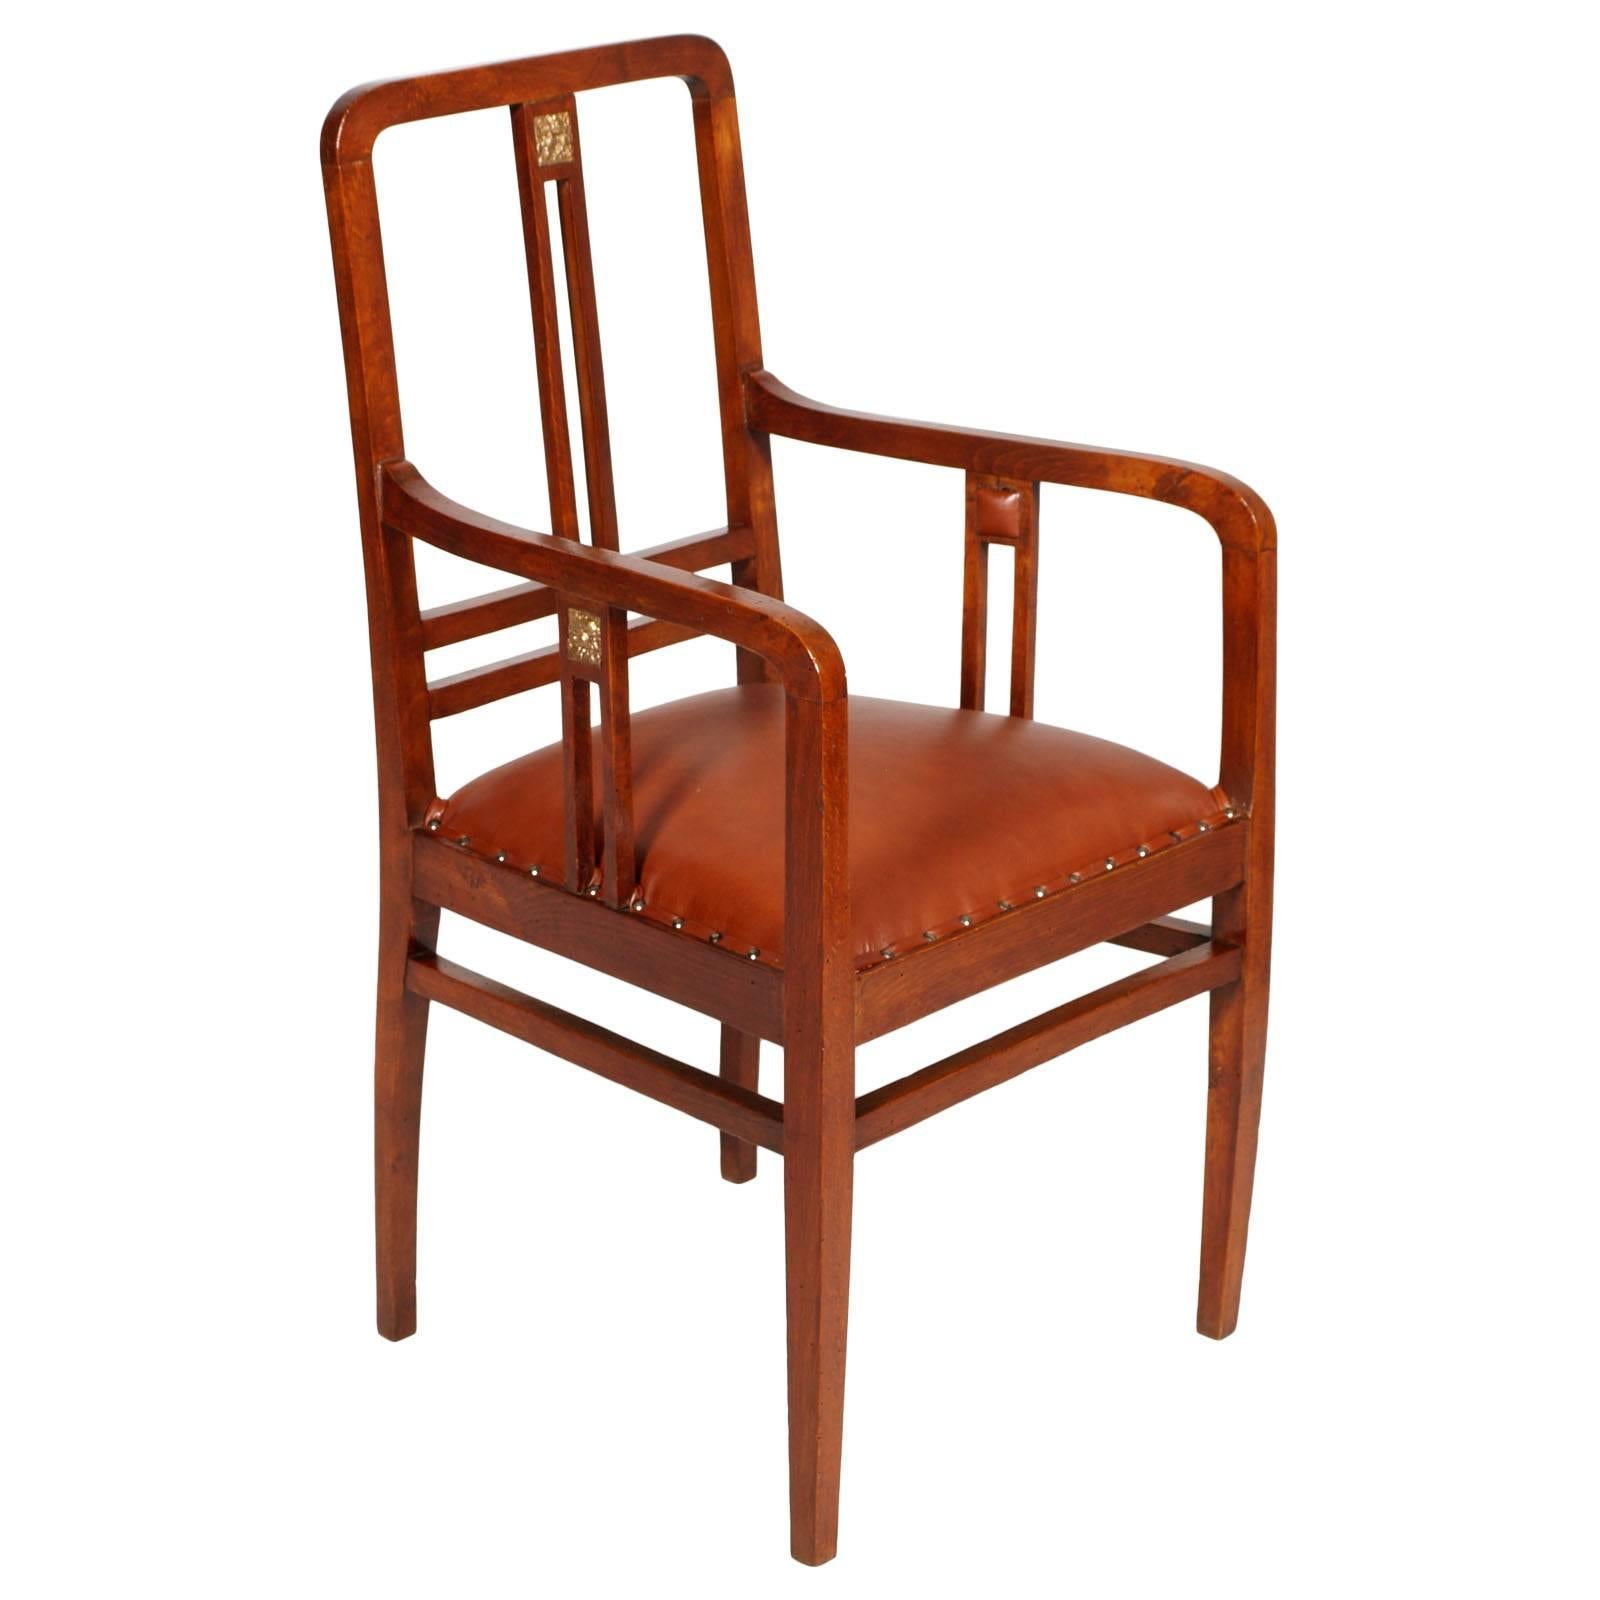 This is the price for one armchairs, not for a set.

Era Art Nouveau, early 20th century museal pair of modernist Wiener Werkstätte armchairs restored re-upholstered leather by Josef Hoffmann. 
Solid walnut wood structure with original patina, with